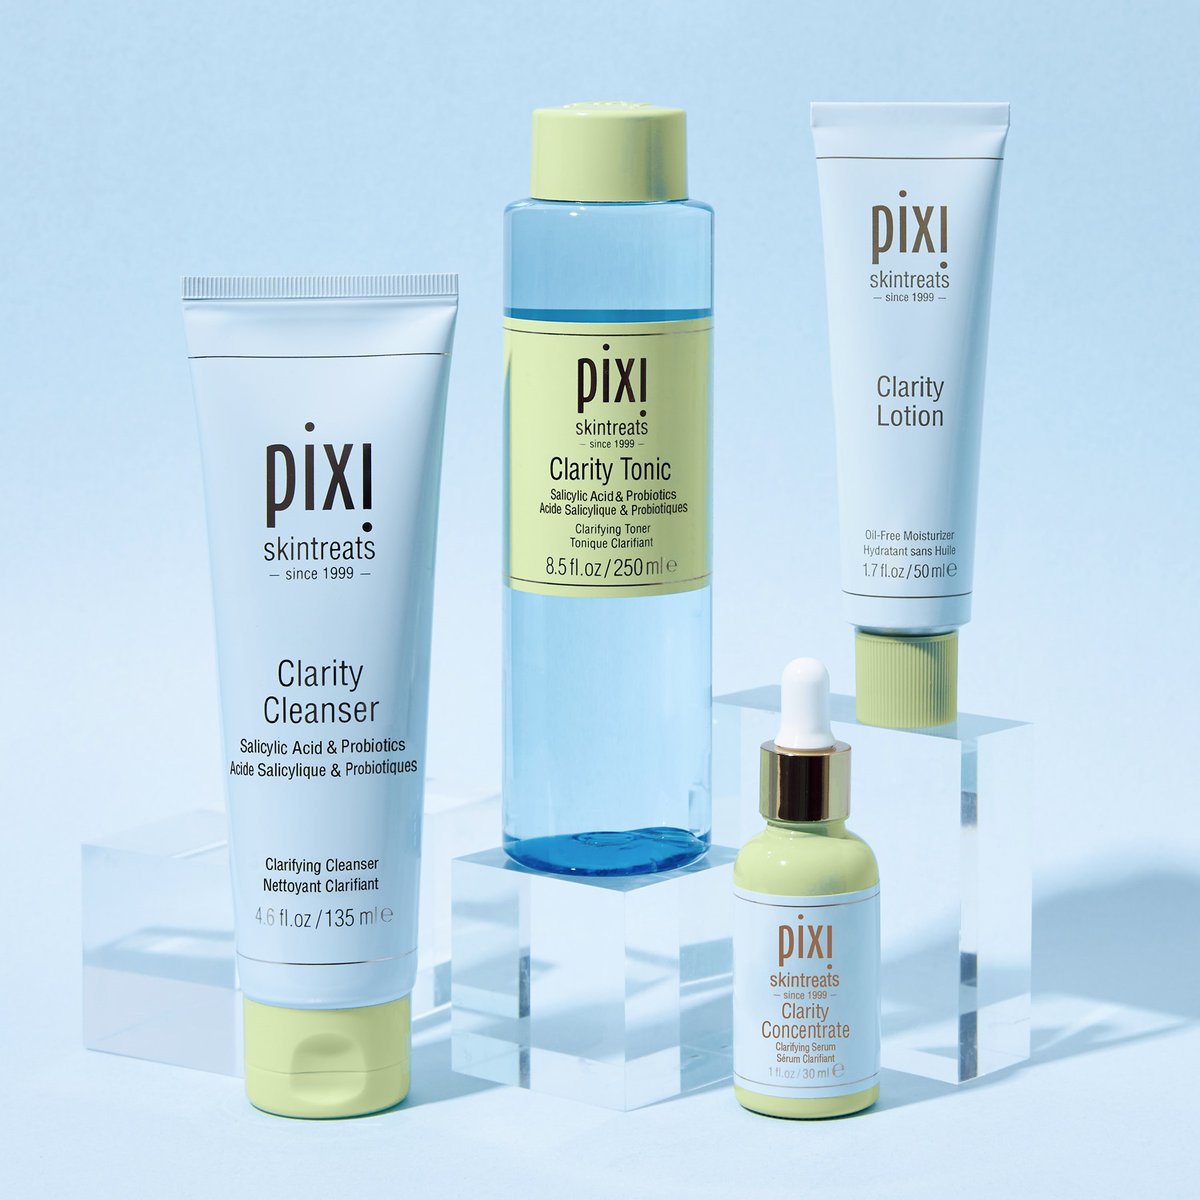 We are thrilled to present the rest of our NEW Clarity Collection. 
💙 Clarity Cleanser purifies
💙 Clarity Tonic balances
💙 Clarity Concentrate clarifies
💙 Clarity Lotion quenches
#PixiBeauty #NewSkincare